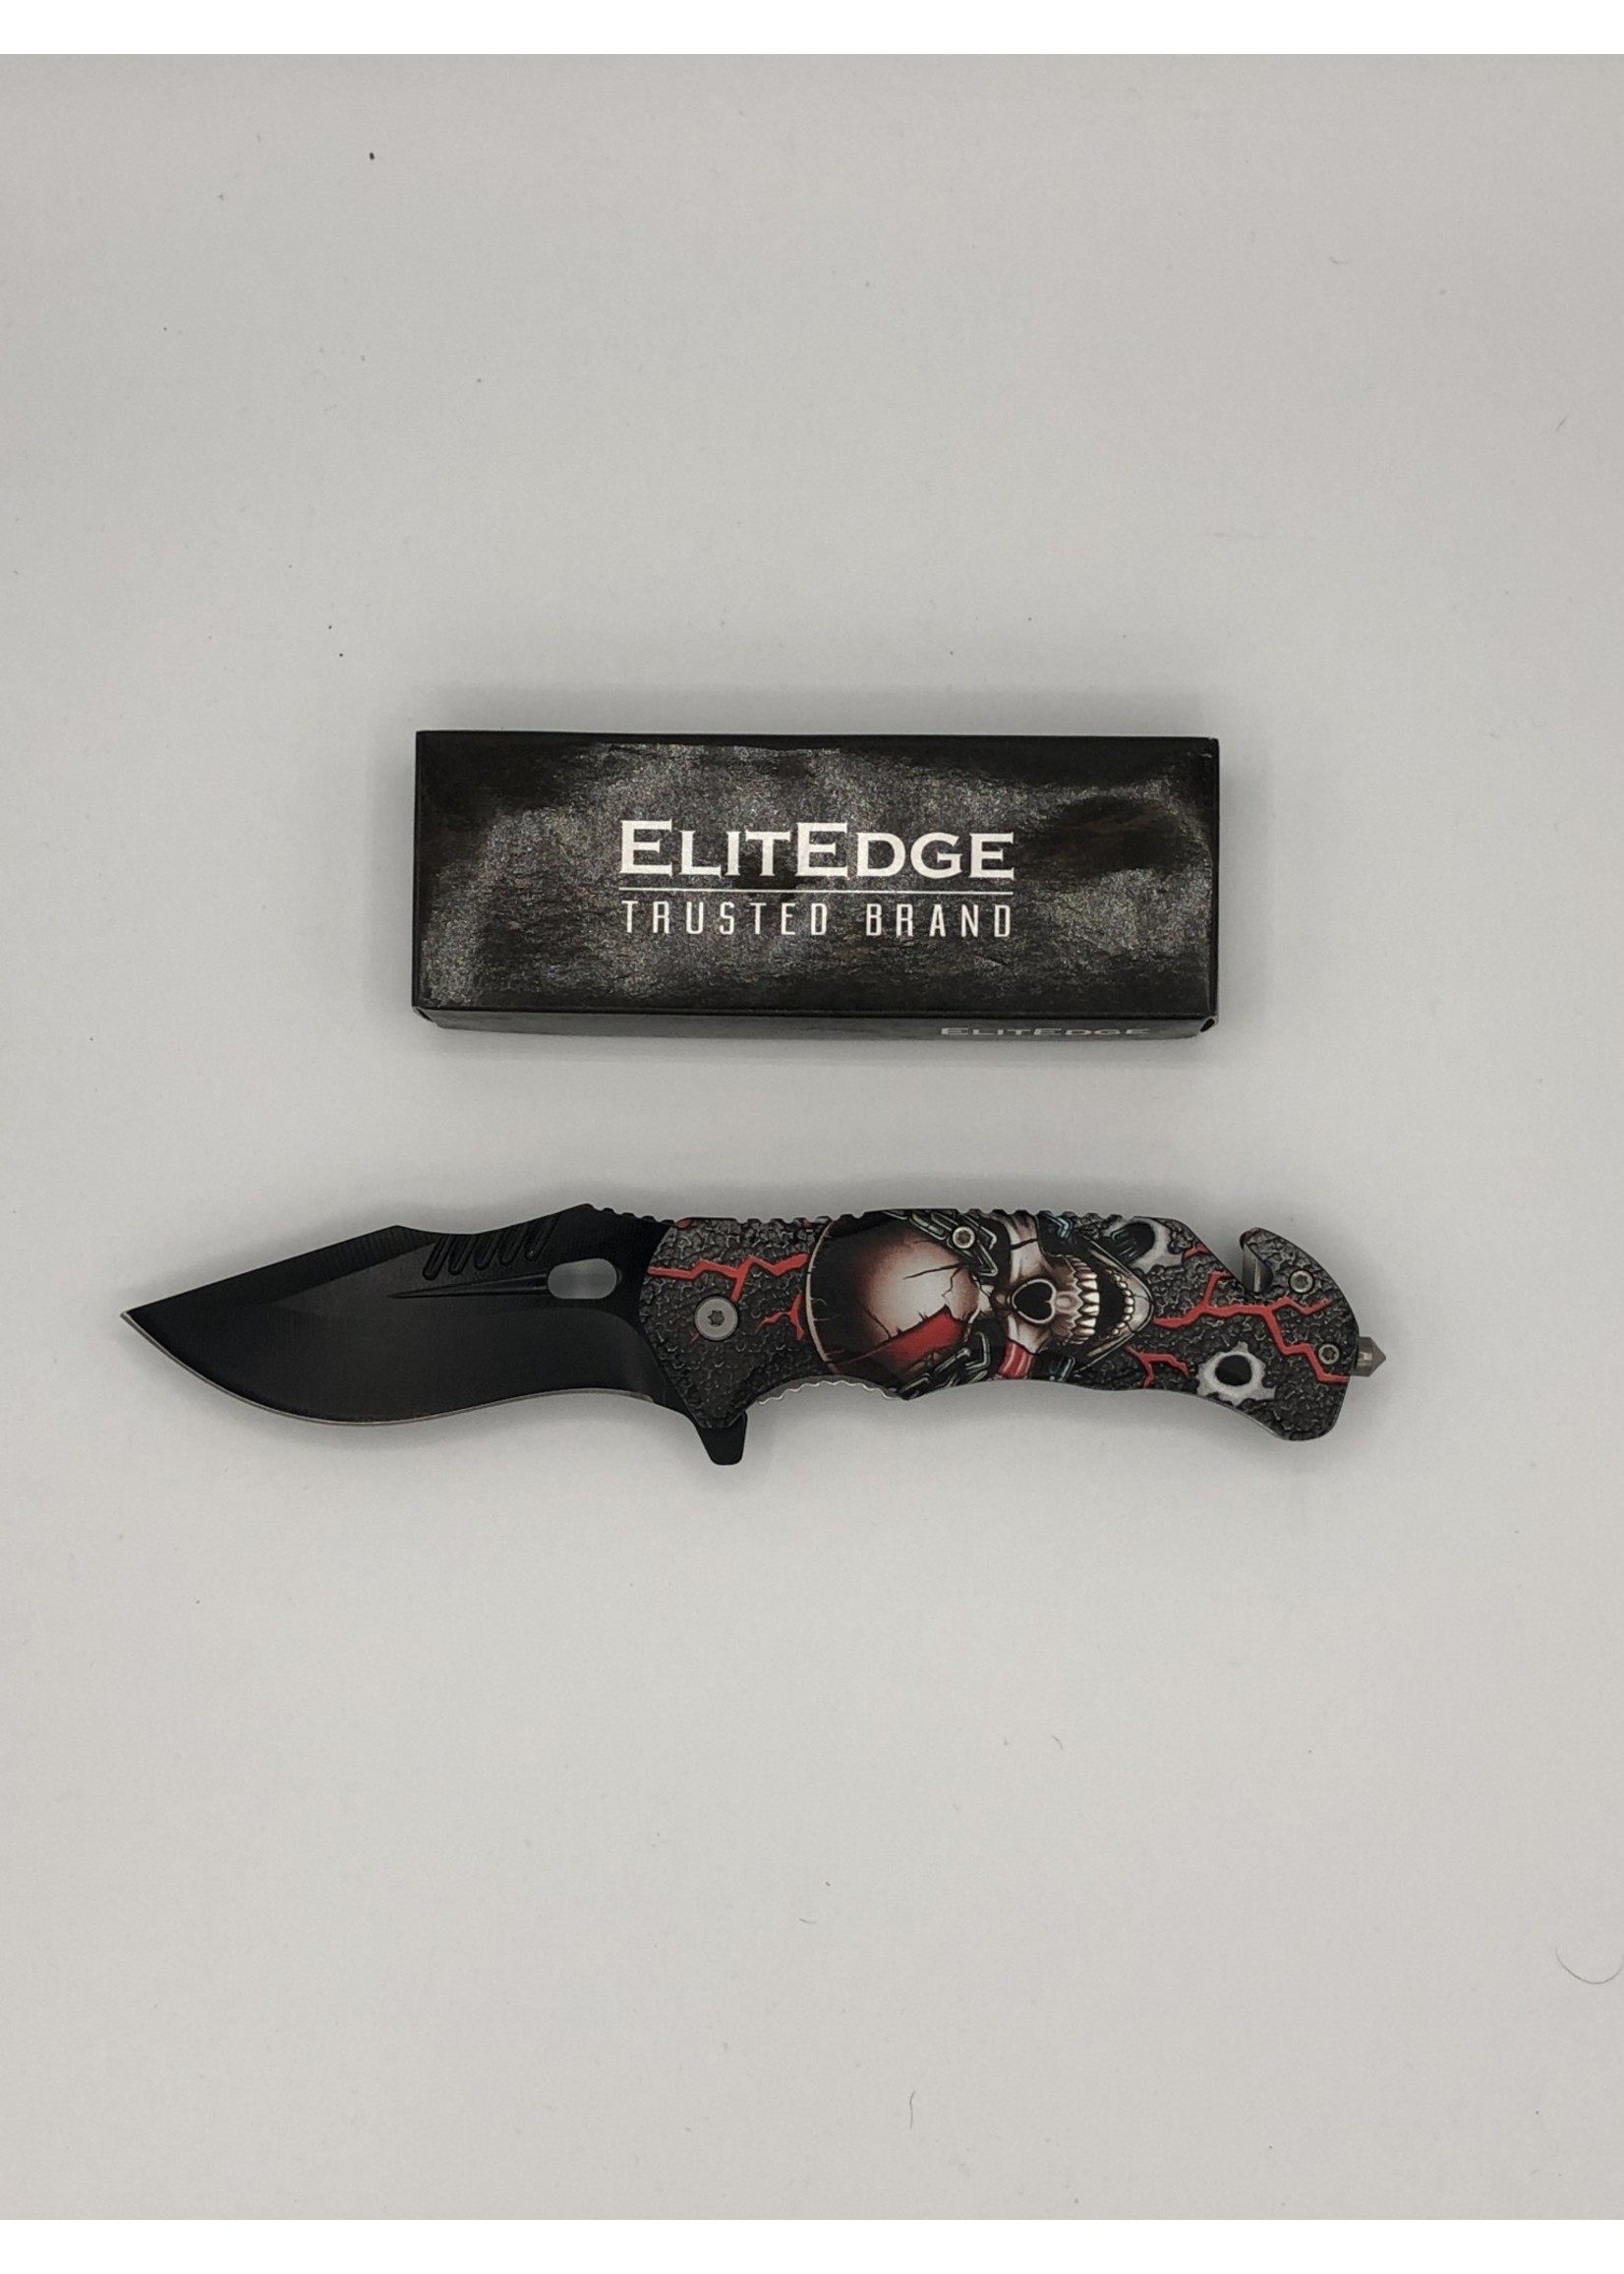 Knives Skull w/ Red Rescue Knife - Window breaker,  This product is a safety tool that combines a skull design with a red rescue knife